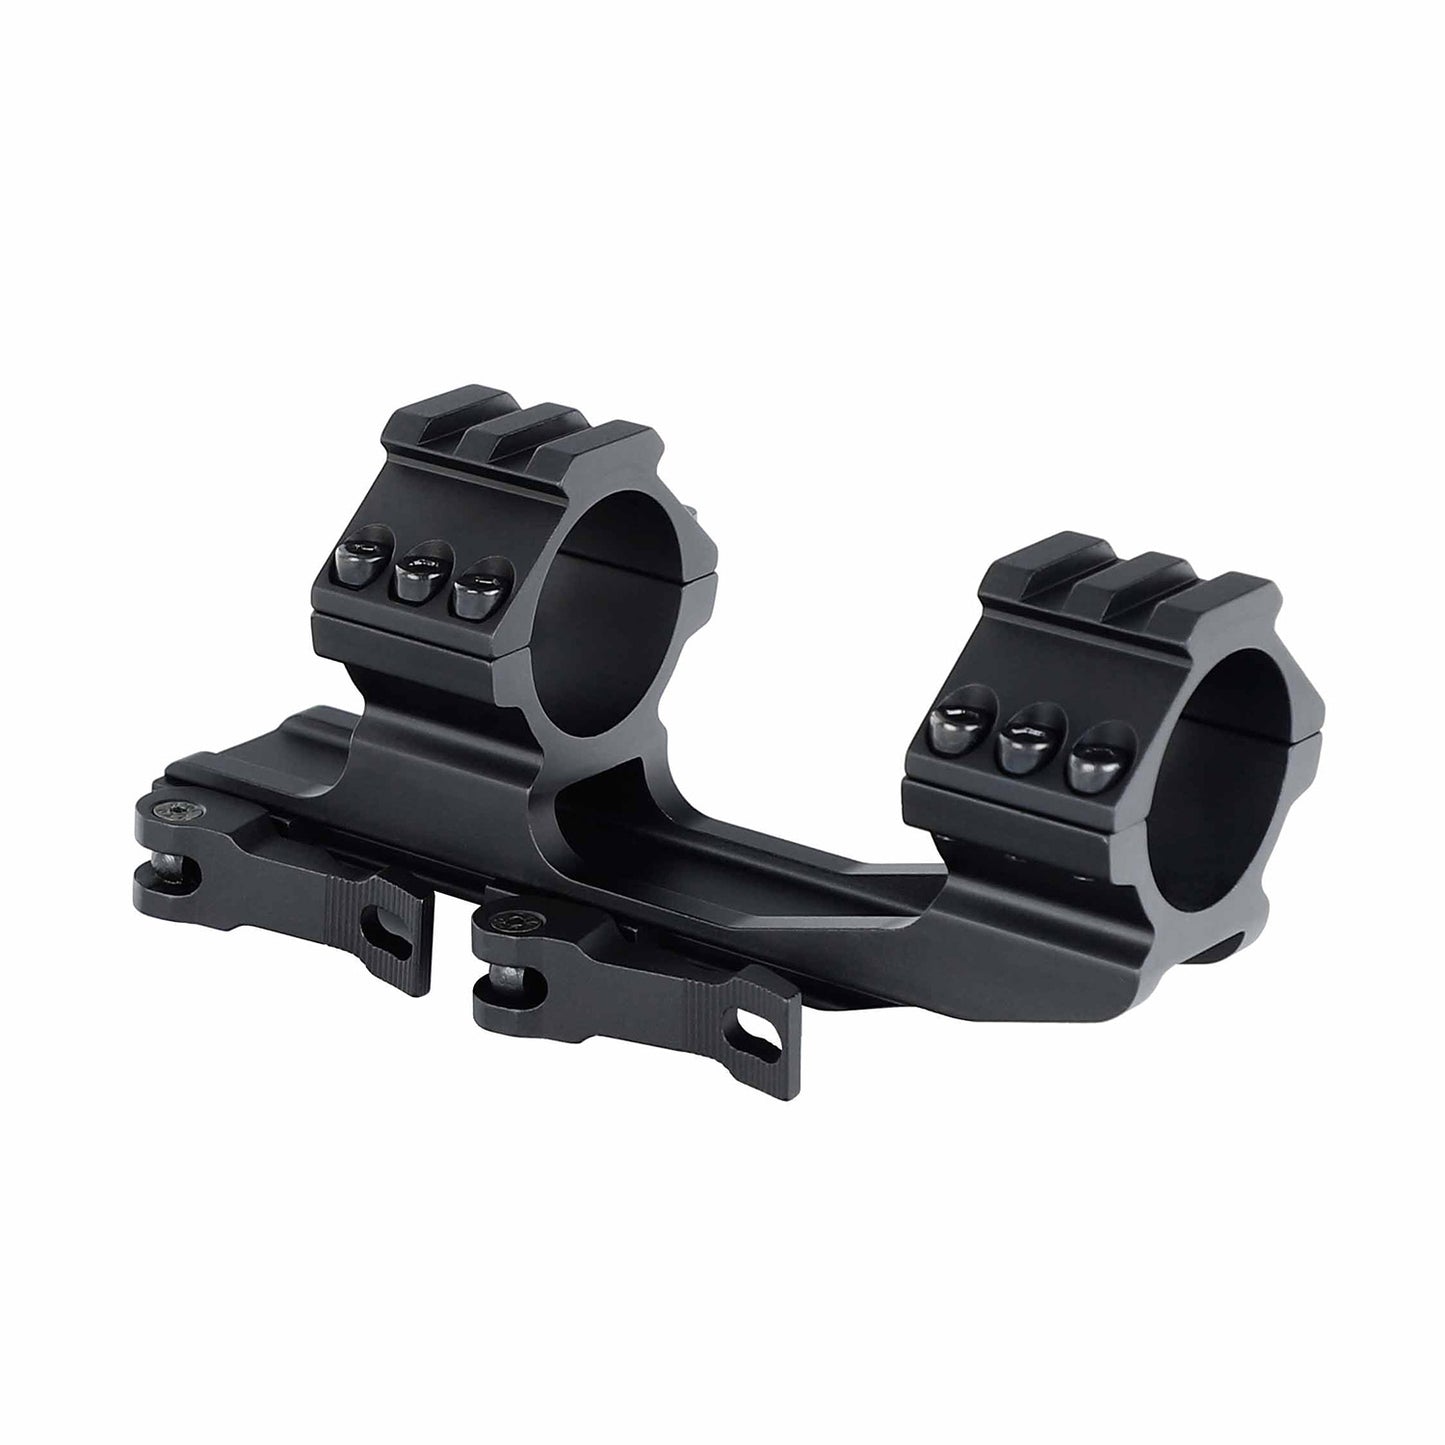 ohhunt® 30mm QD Cantilever Scope Mount with Top Picatinny Rail